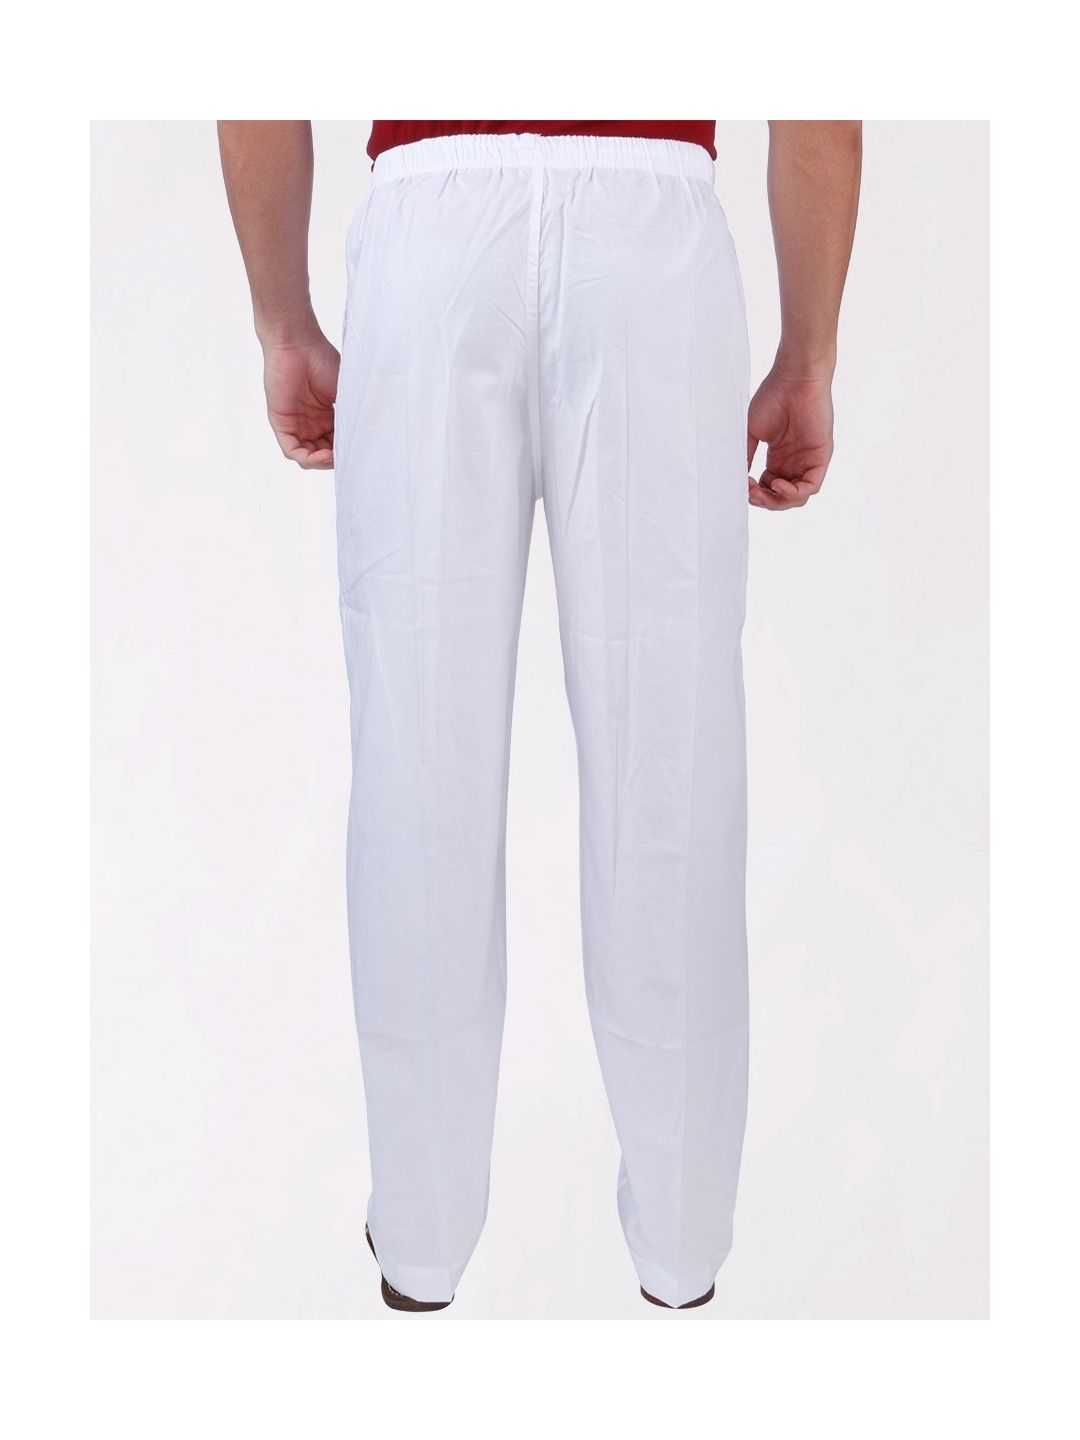 Men's Off-White Indian Pajama Pants - Solid Straight Cut | In-Sattva